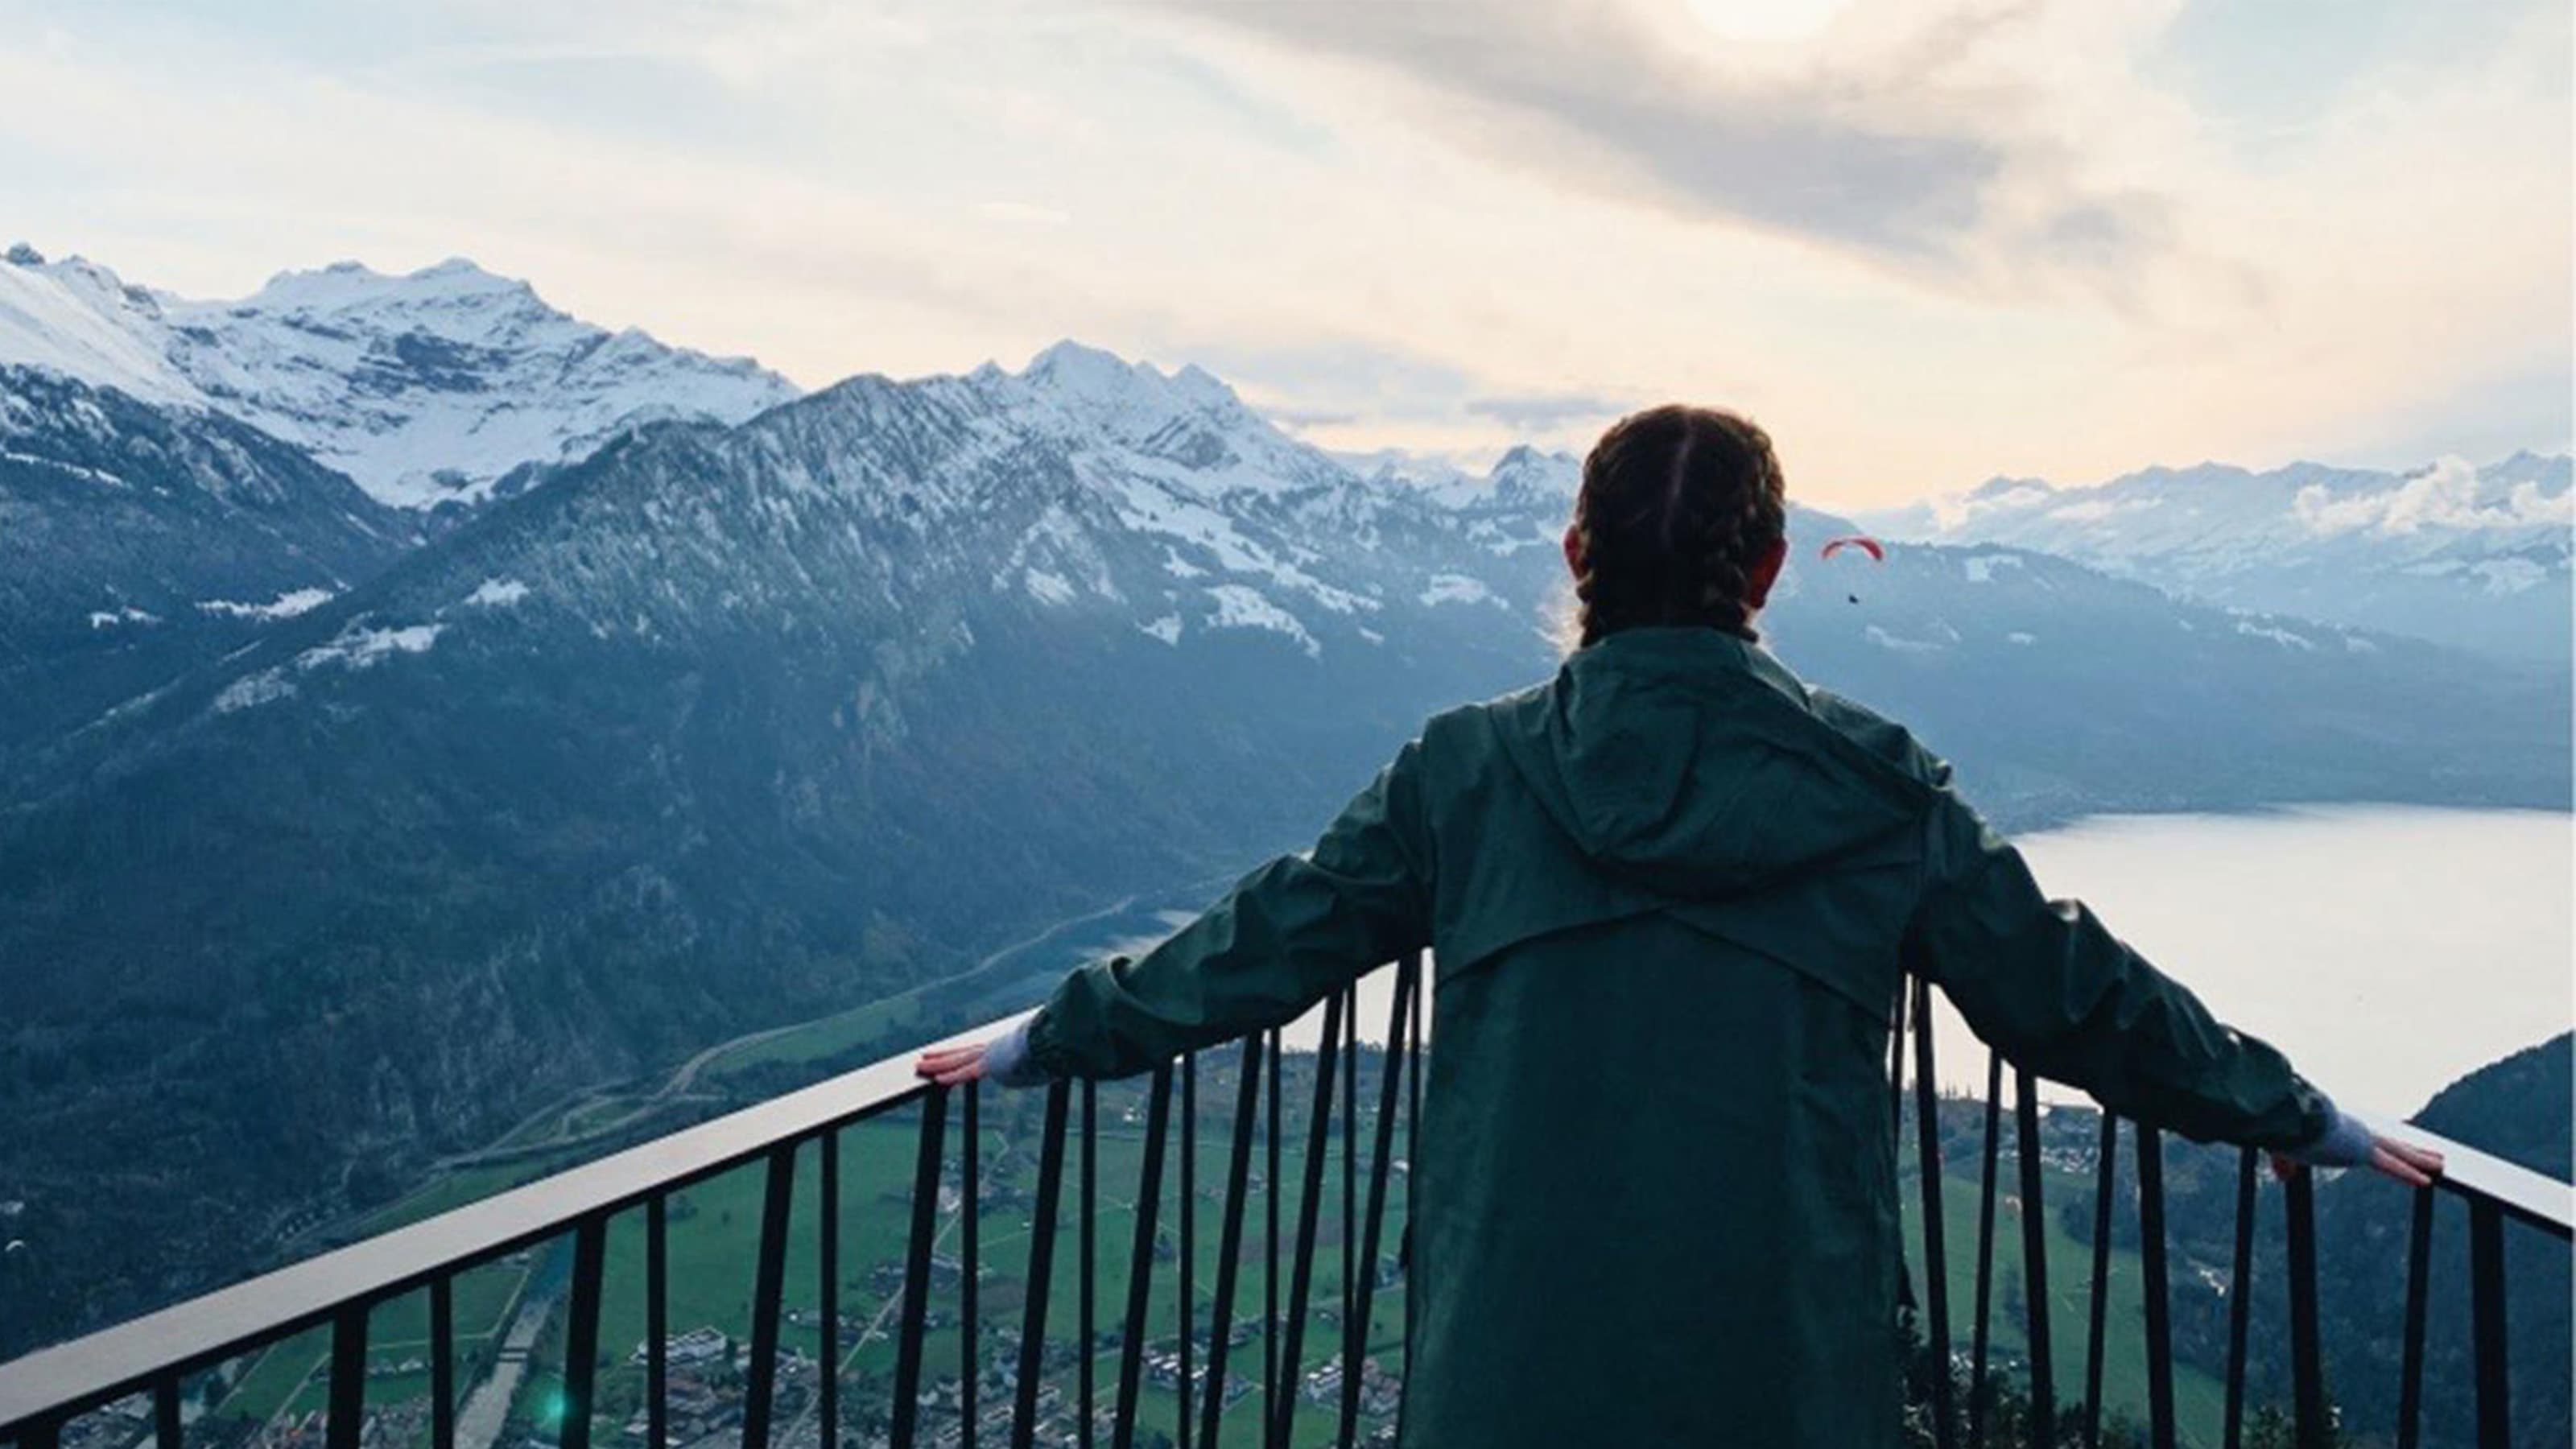 Student standing on balcony overlooking mountains and lake